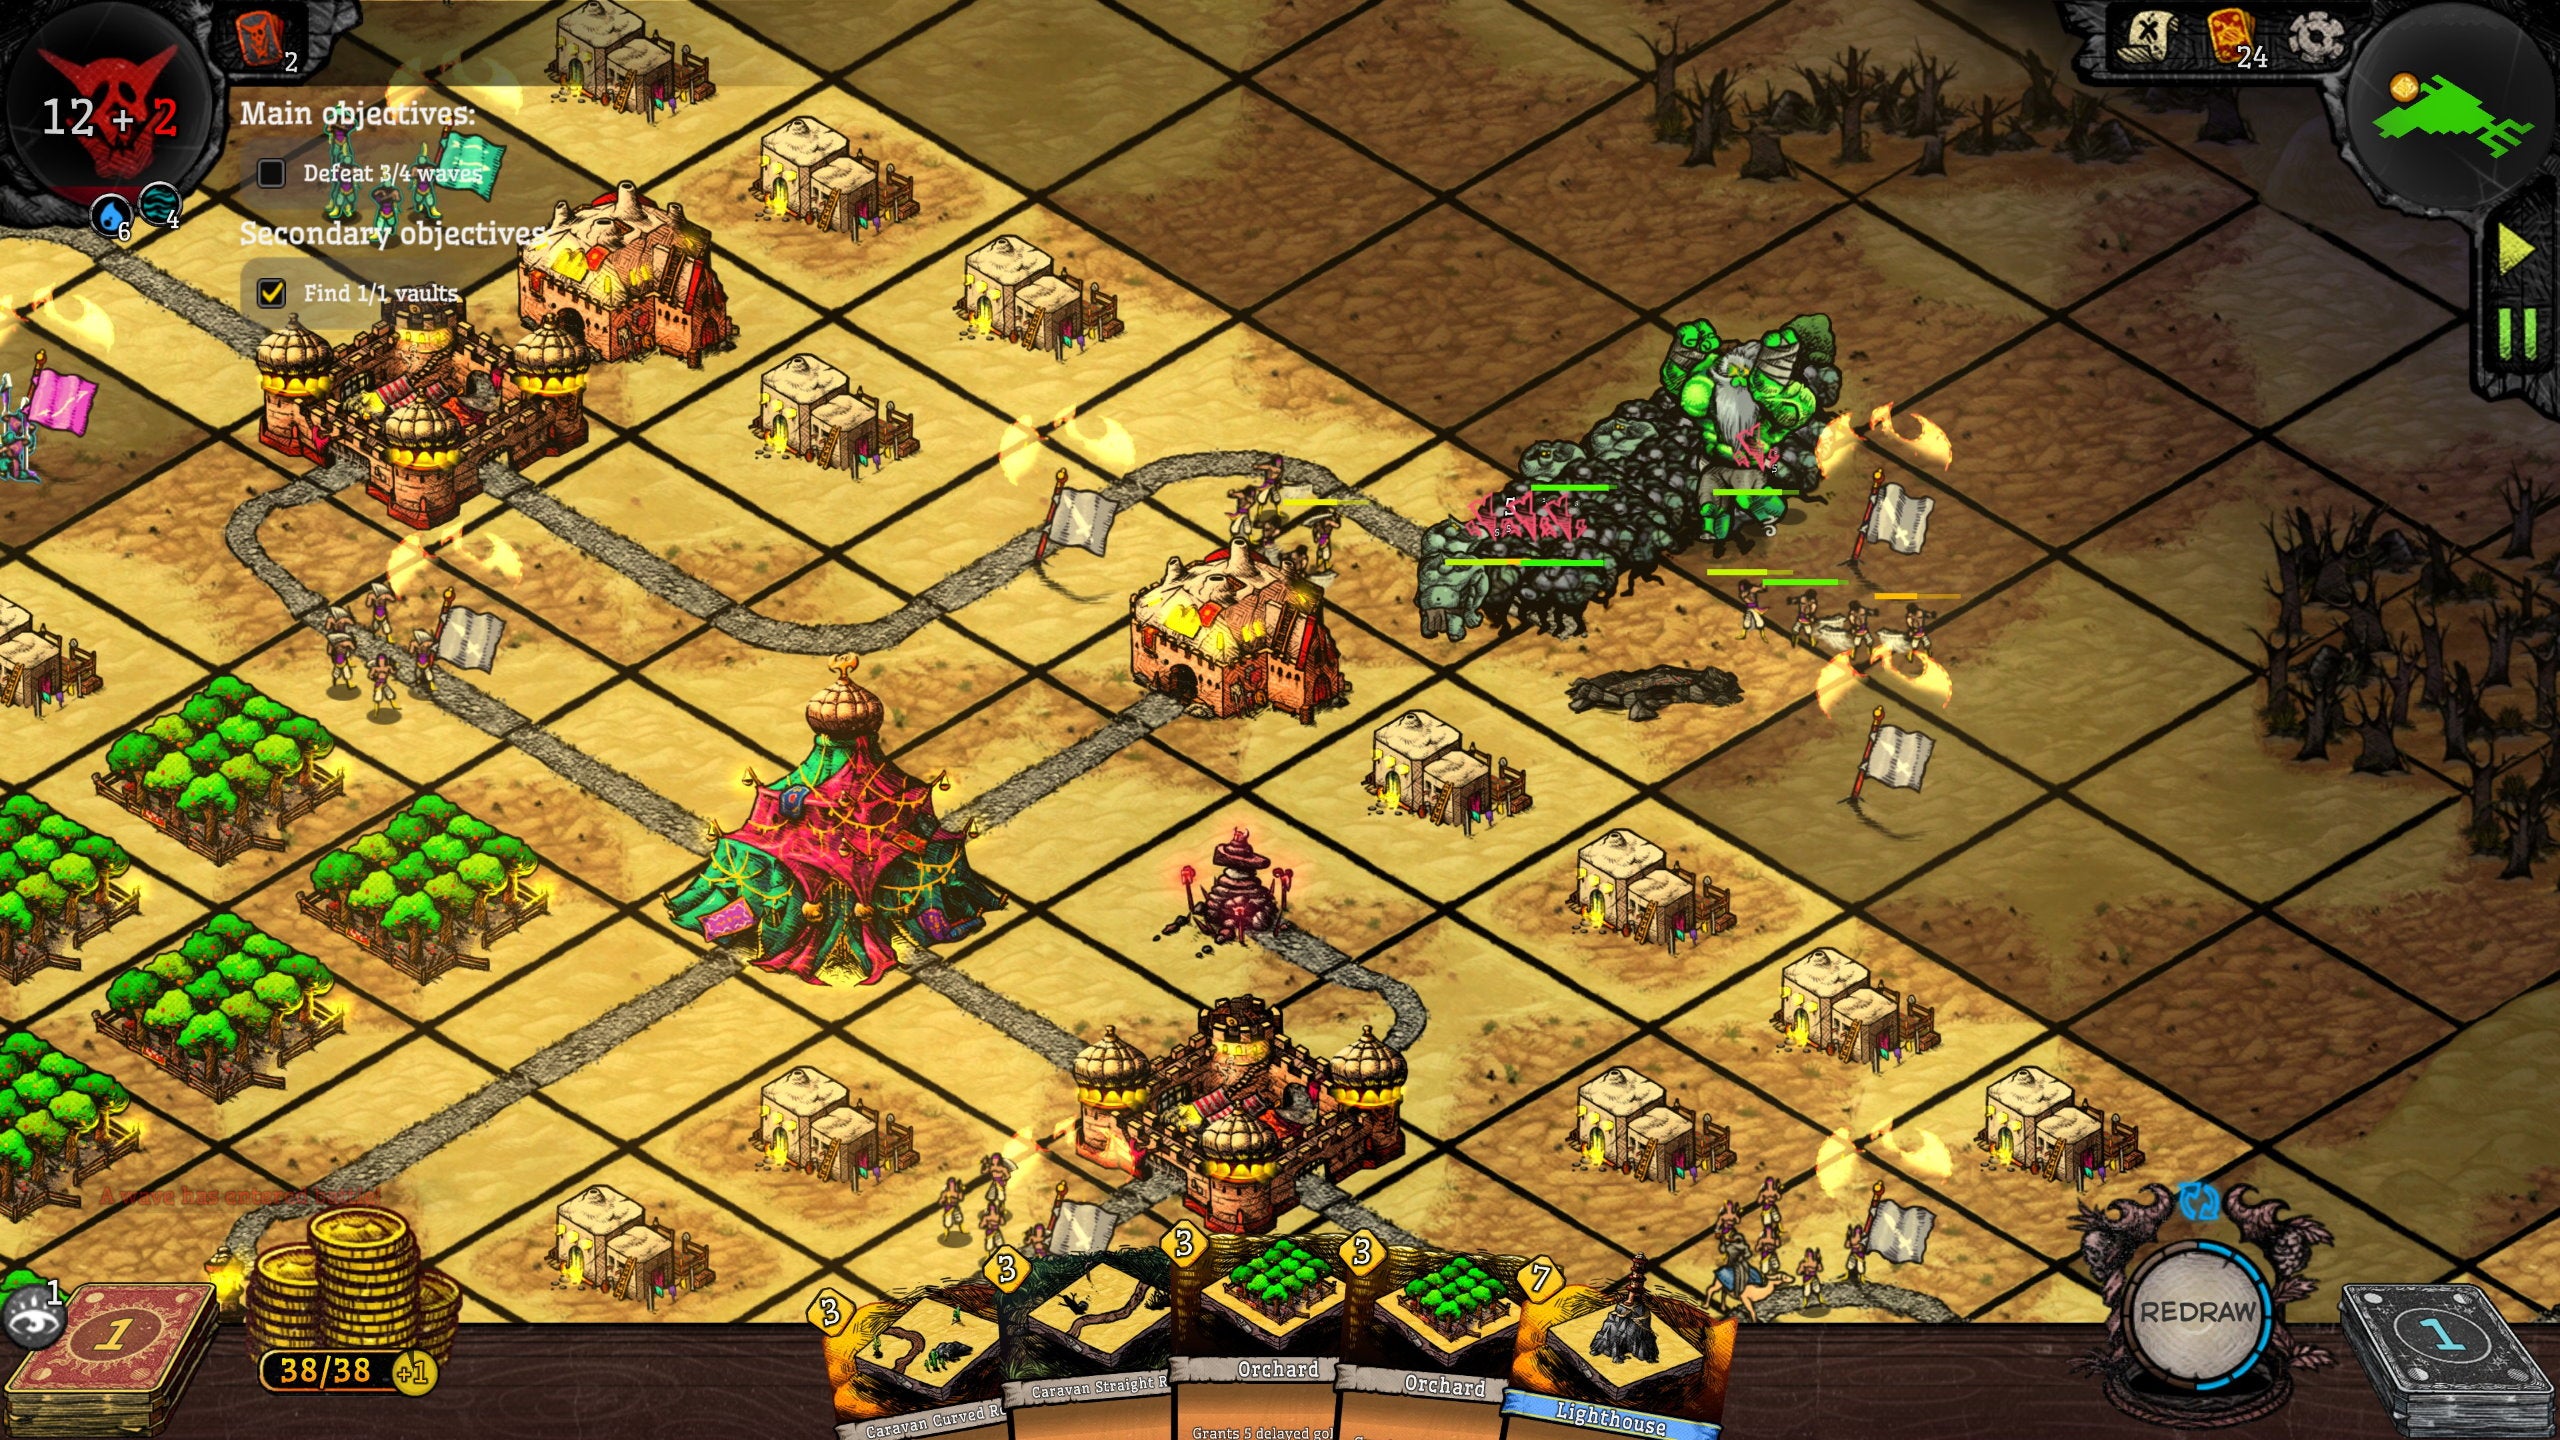 A squad of desert troops attack an oncoming orc horde in ORX